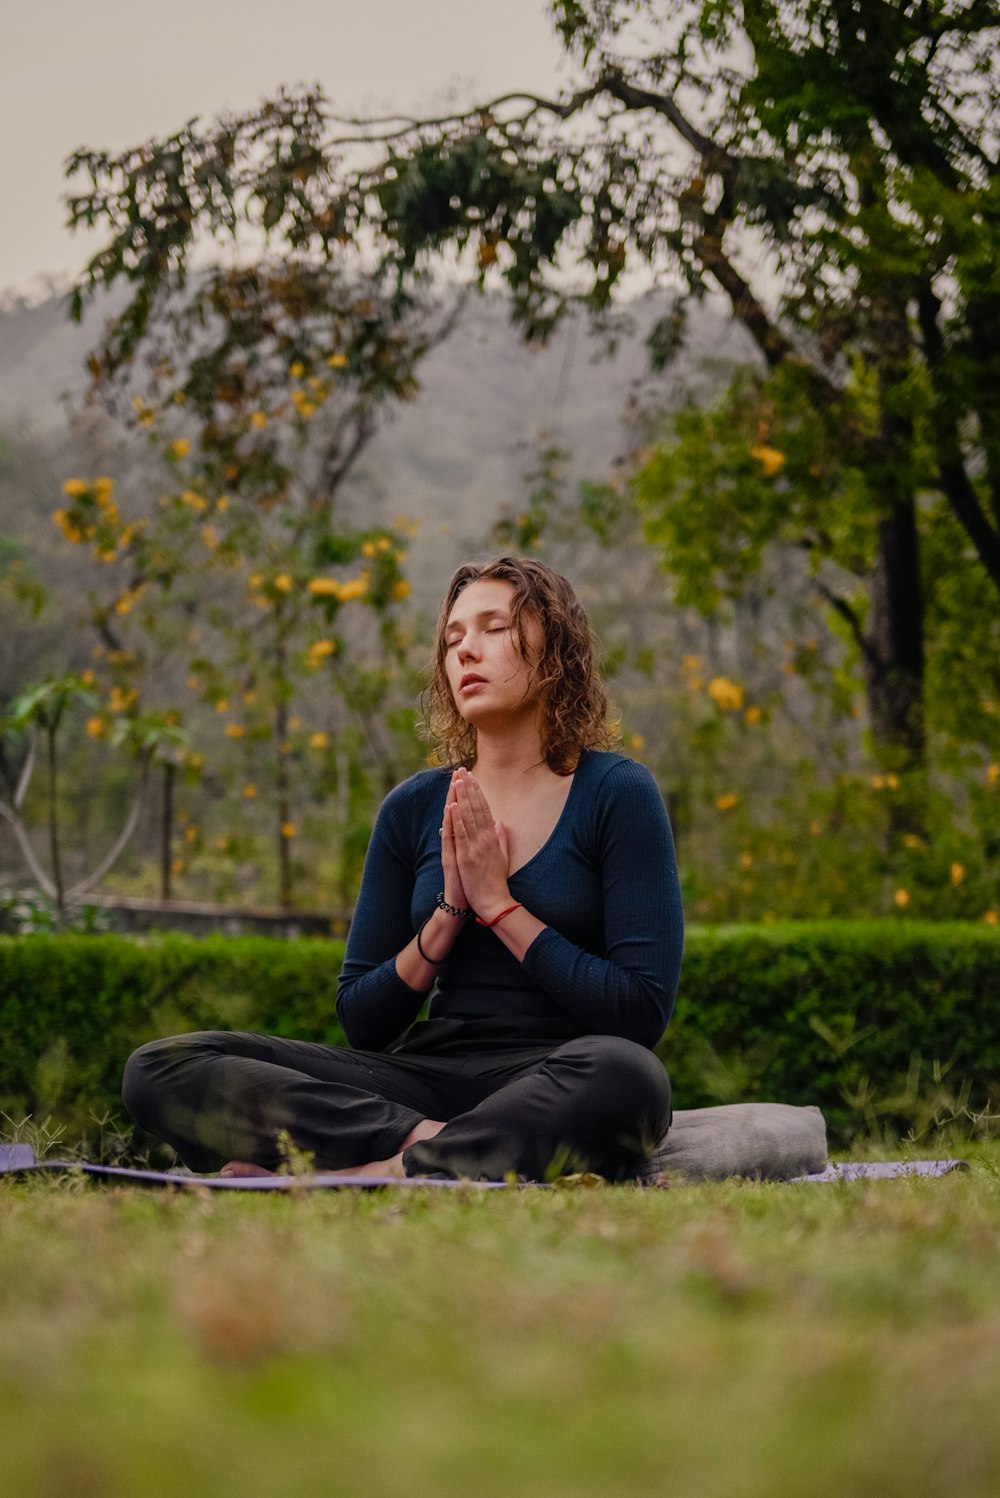 a woman sitting in a yoga position in a park